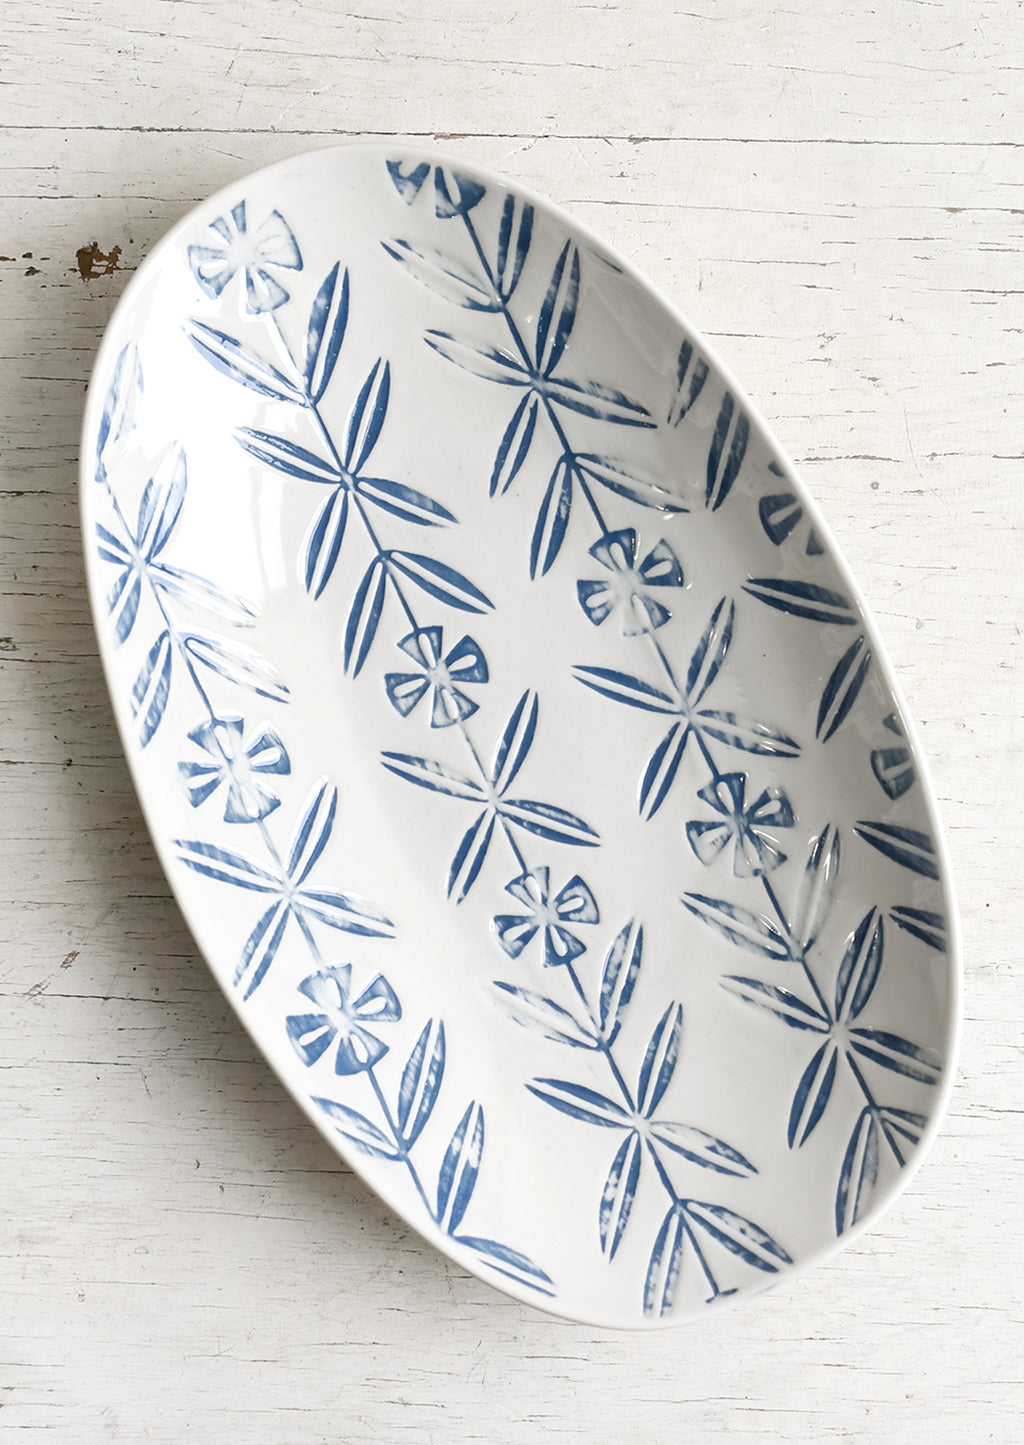 1: An oval shaped ceramic platter with blue imprint design.